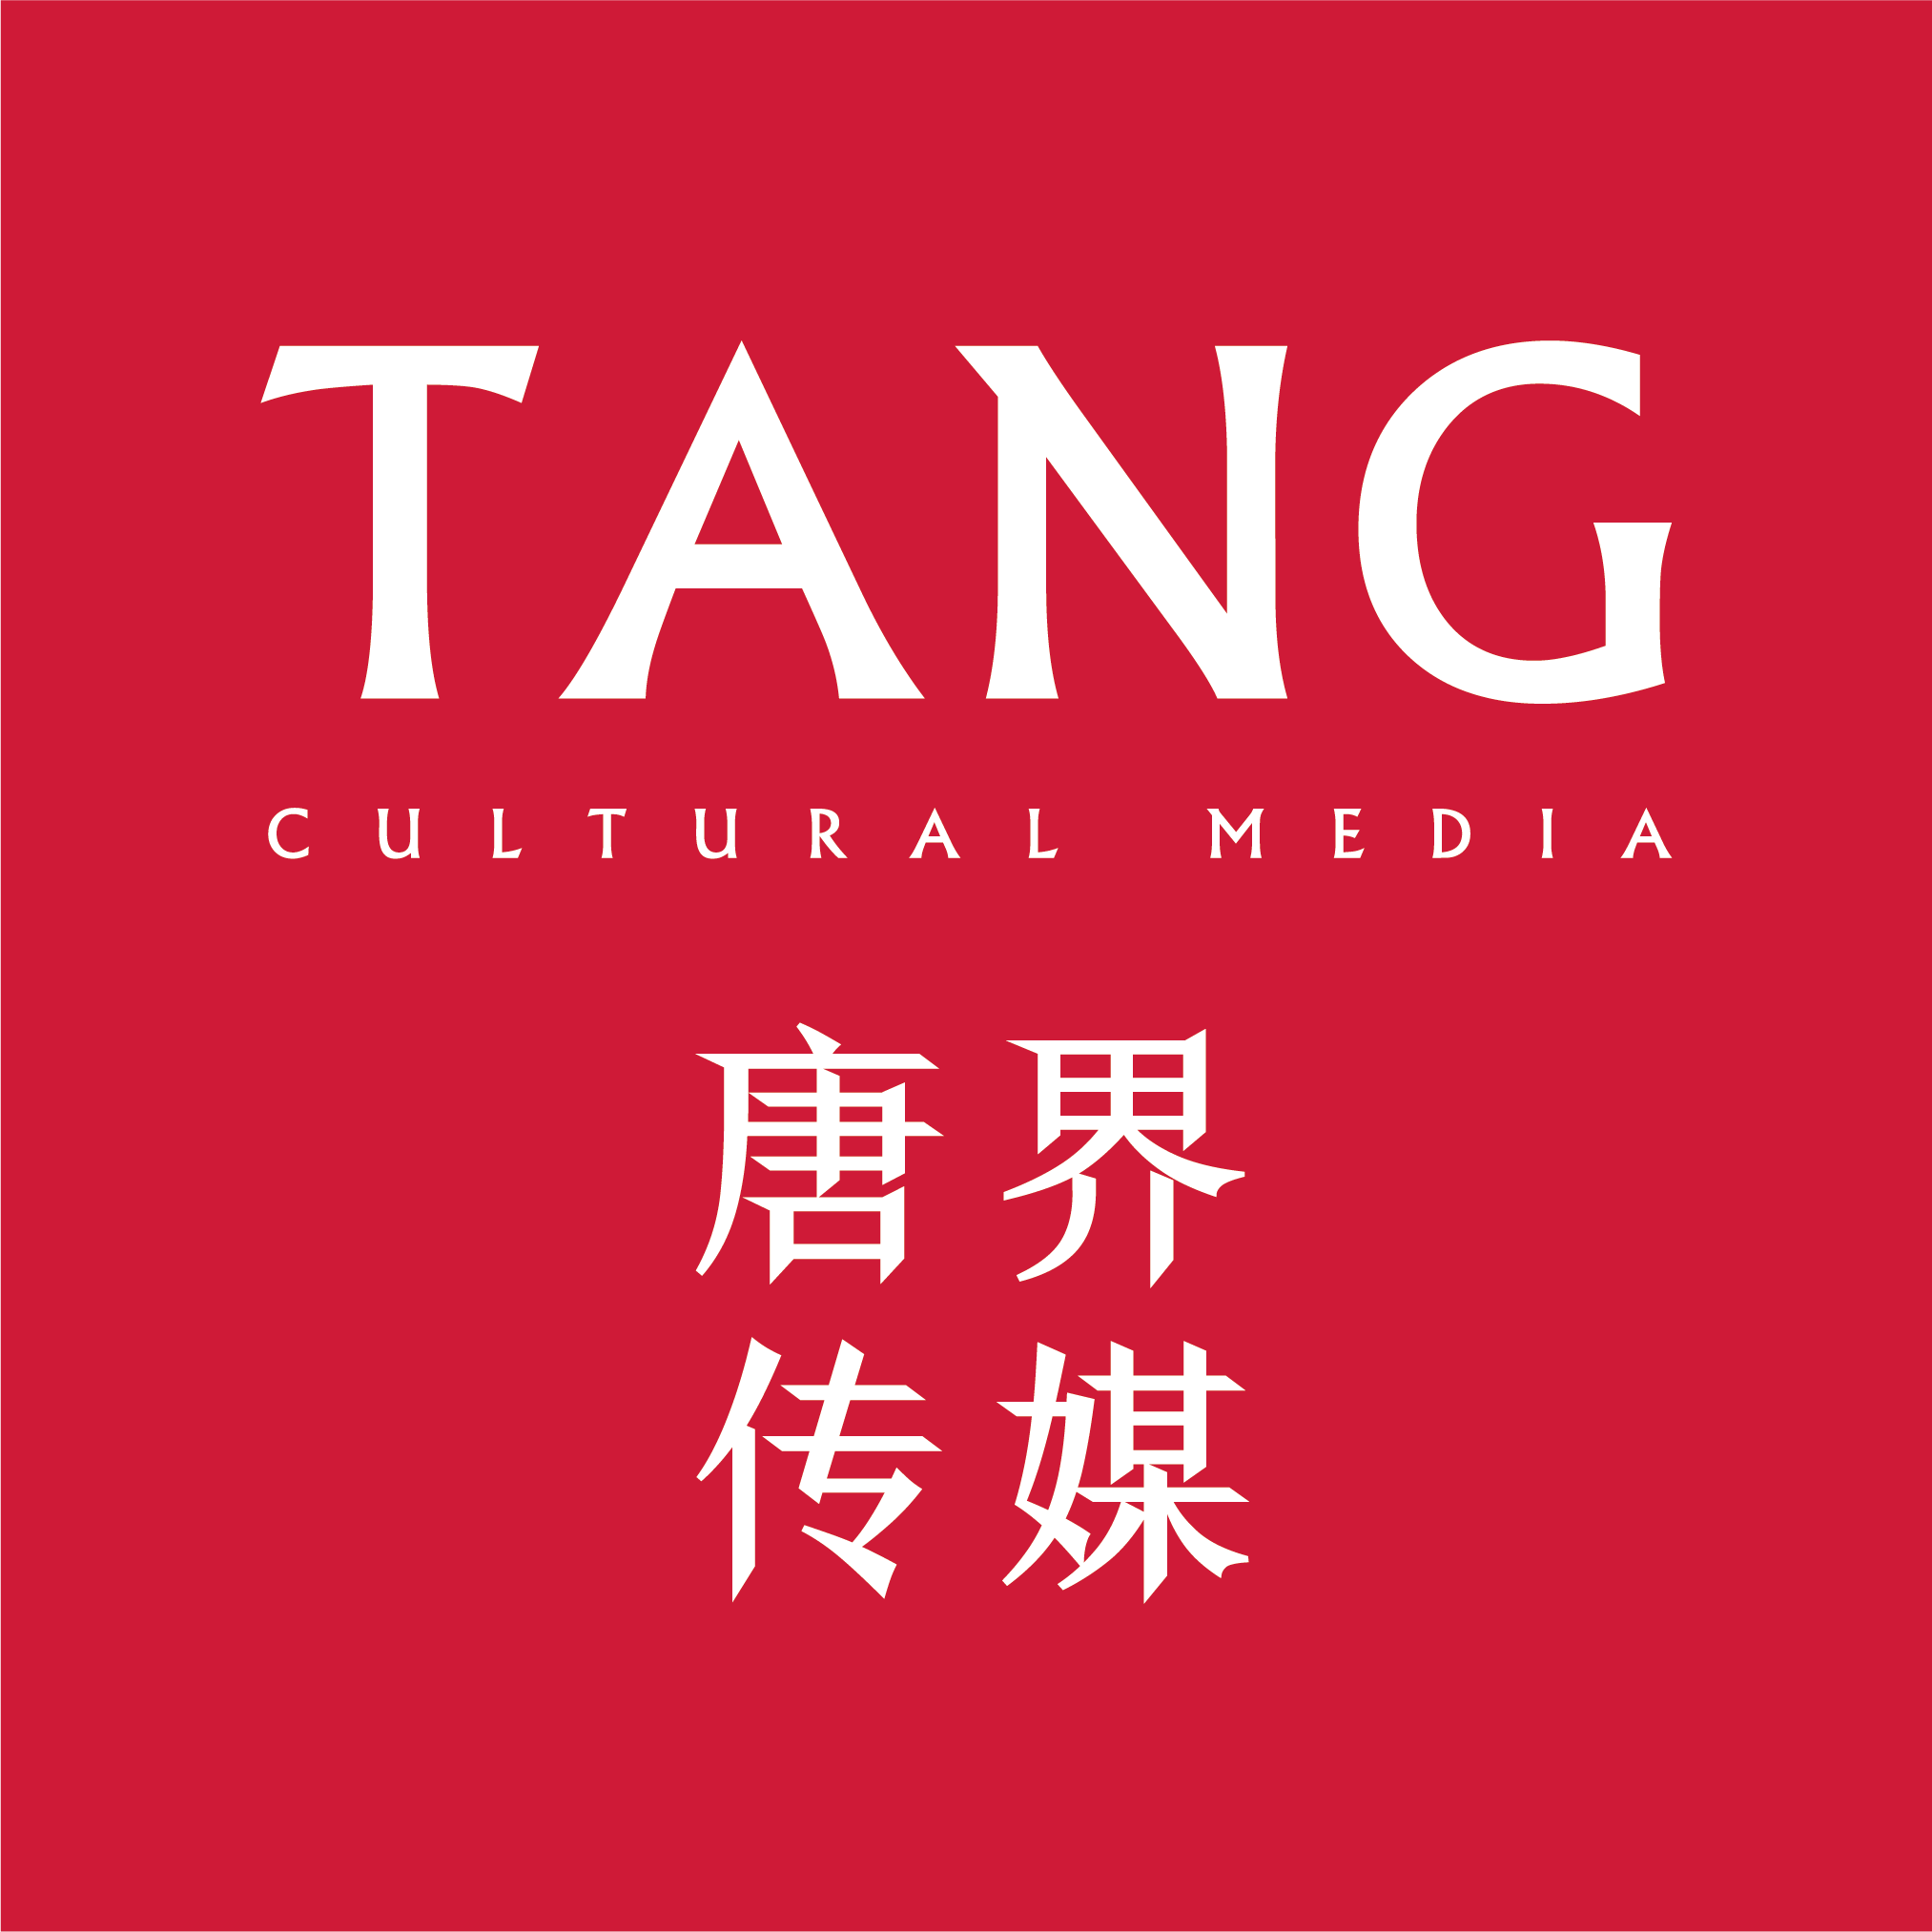 Tang Cultural Media Enhances Outdoor LED Screen Advertising Resources, Extending Coverage Across Major Cities in China